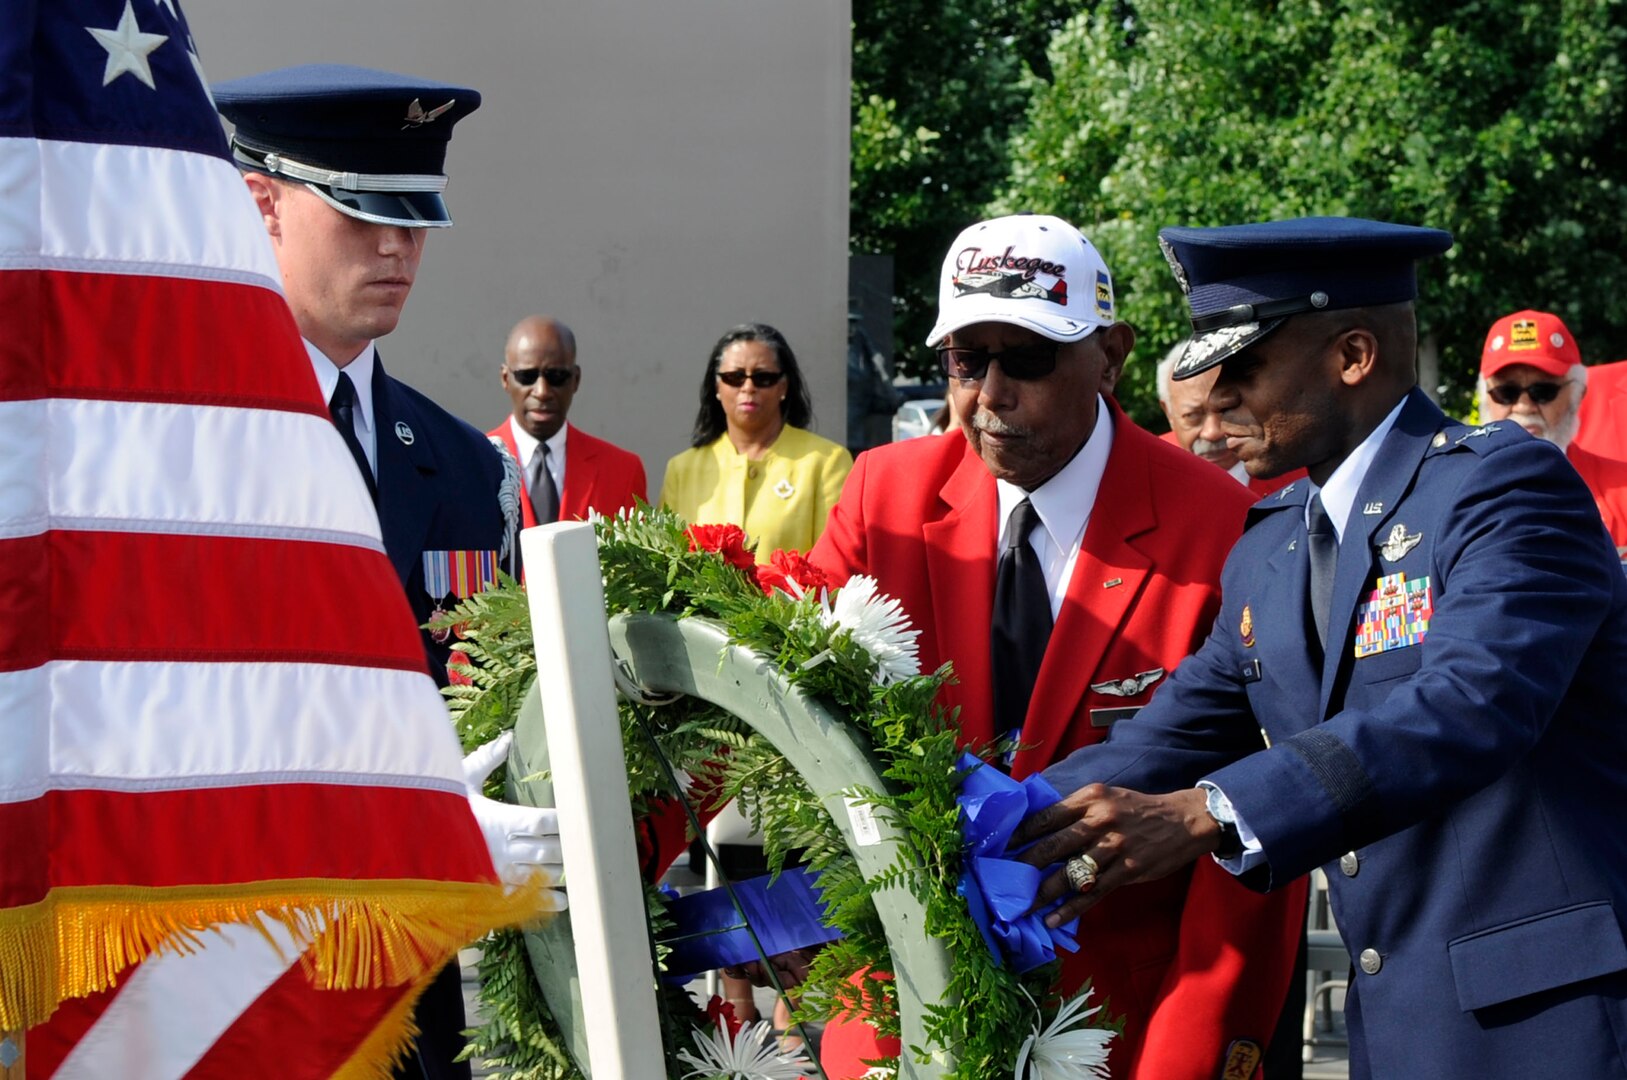 Air Force Maj. Gen. Darren W. McDew, the Air Force District of Washington
commander, and Jim Pryde, a Tuskegee Airman, lay a wreath at the U.S. Air
Force Memorial on July 31, 2011, in Washington, D.C. Pryde served with the
Army Air Corps' 477th Medium Bombardment Group as a combat crewman. During
his tenure, he accrued 1,600 flight hours before continuing his civil service
career as an intelligence analyst with the Armed Forces Security Agency.
(U.S. Air Force photo by Staff Sgt. Raymond Mills) (Released)